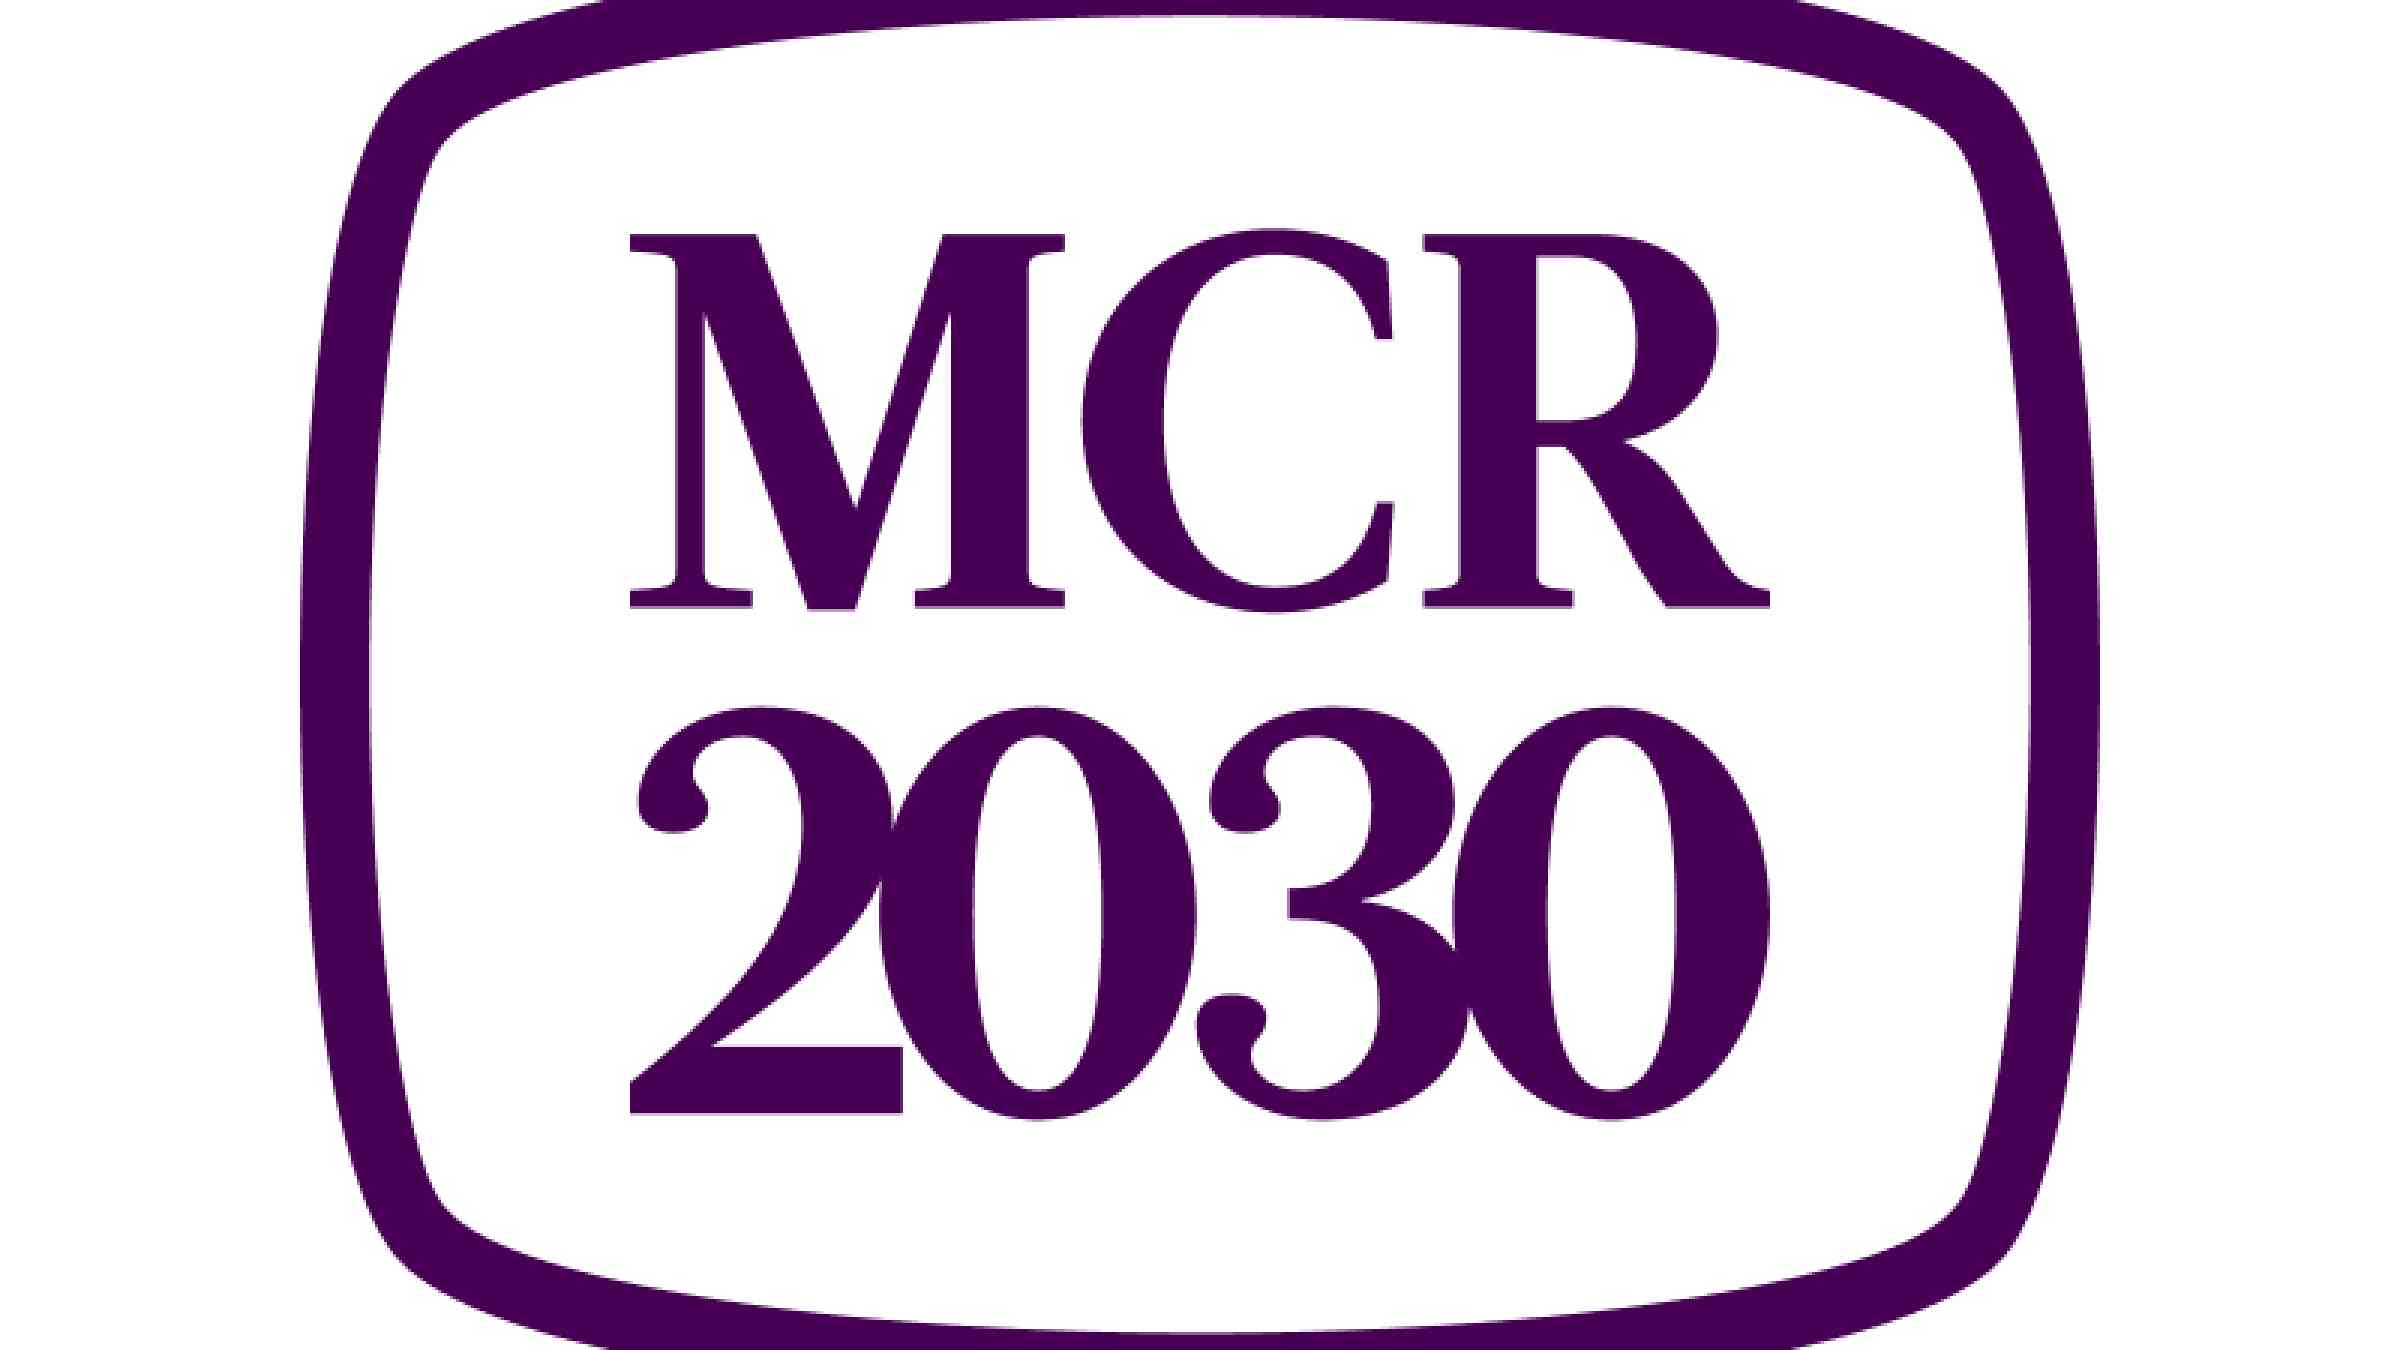 Making Cities Resilient 2030 logo 